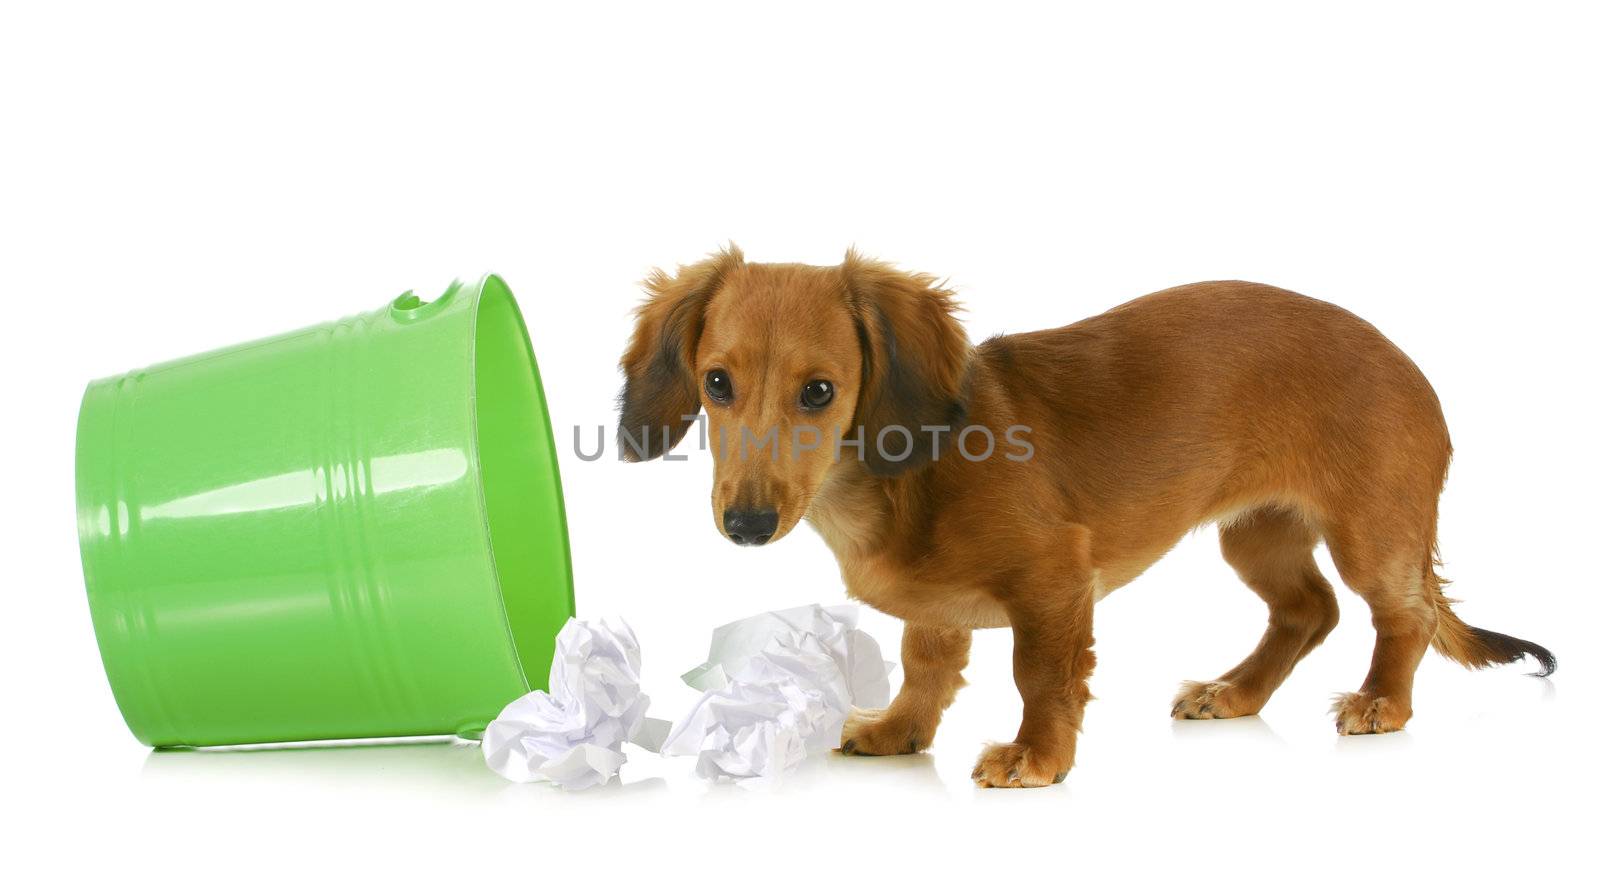 bad dog - miniature dachshund playing in the garbage isolated on white background